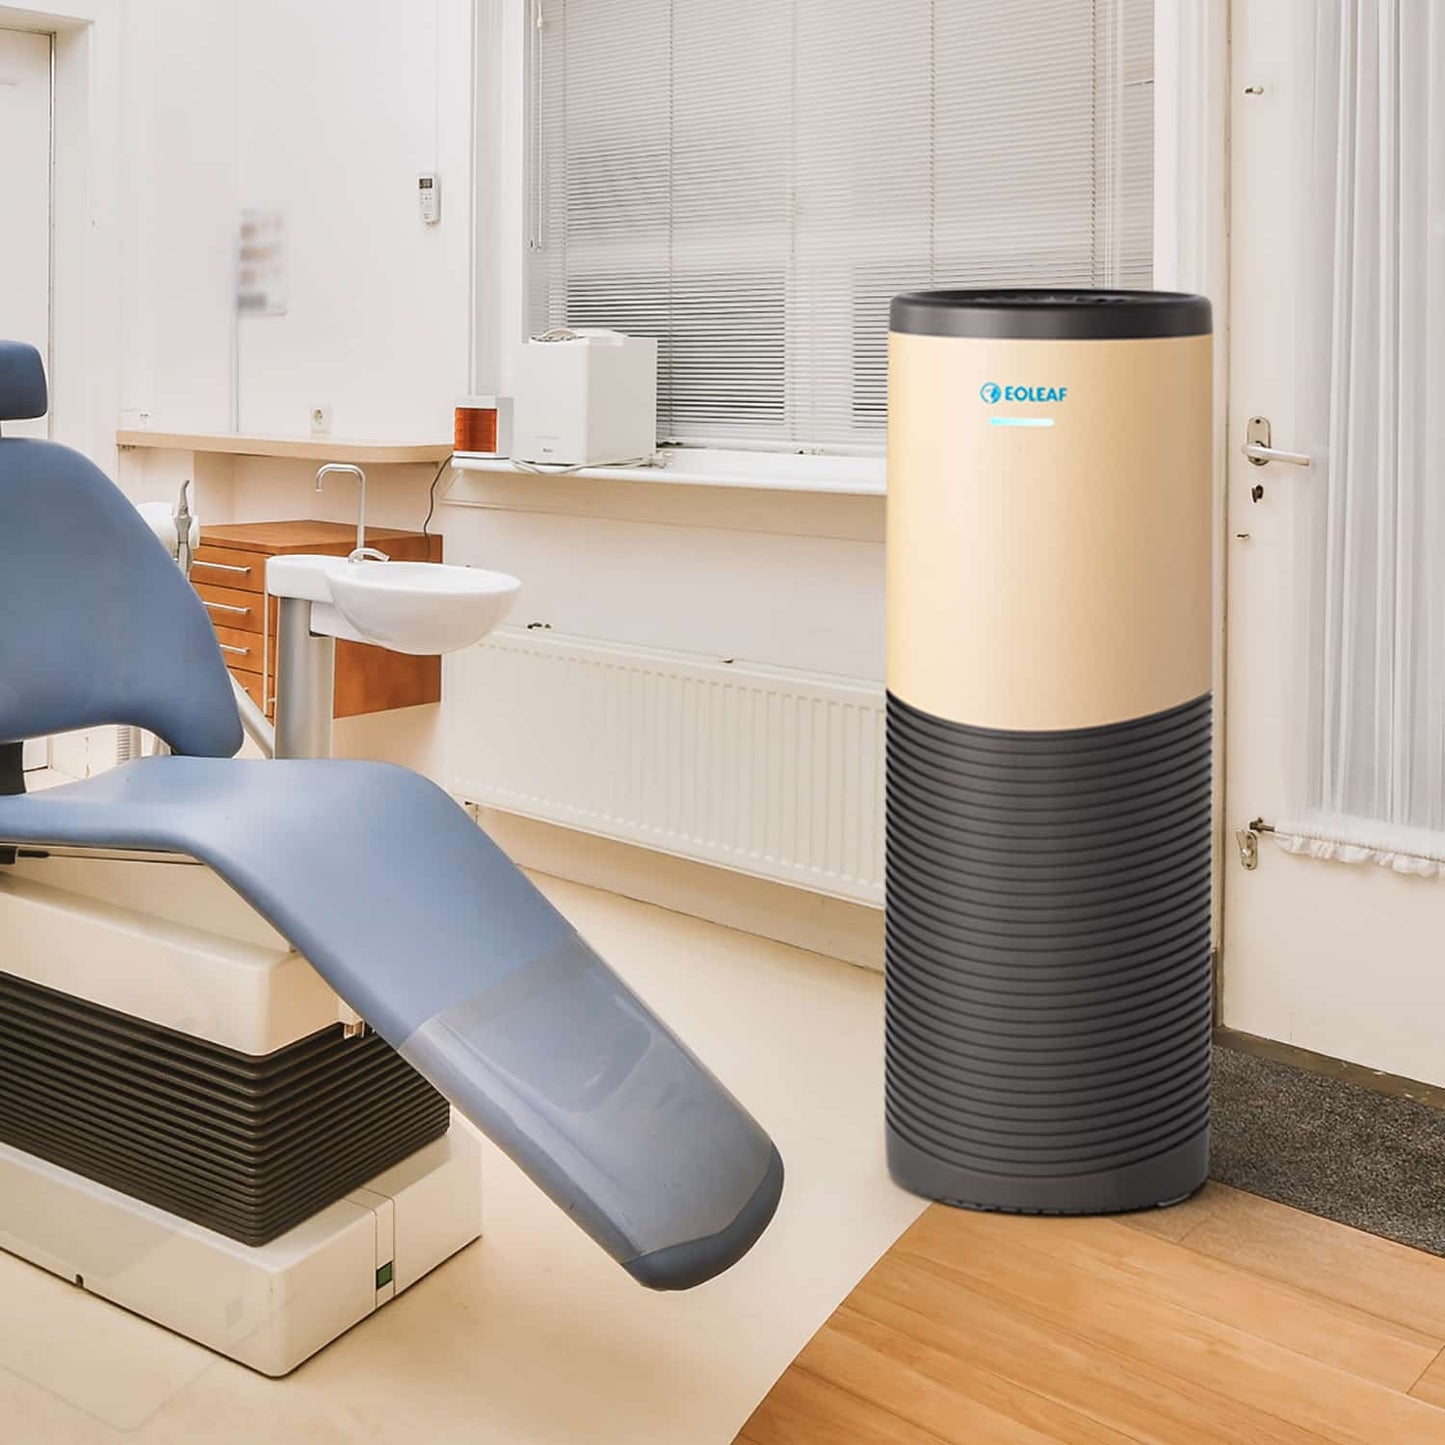 The AEROPRO 150 air purifier in a medical setting